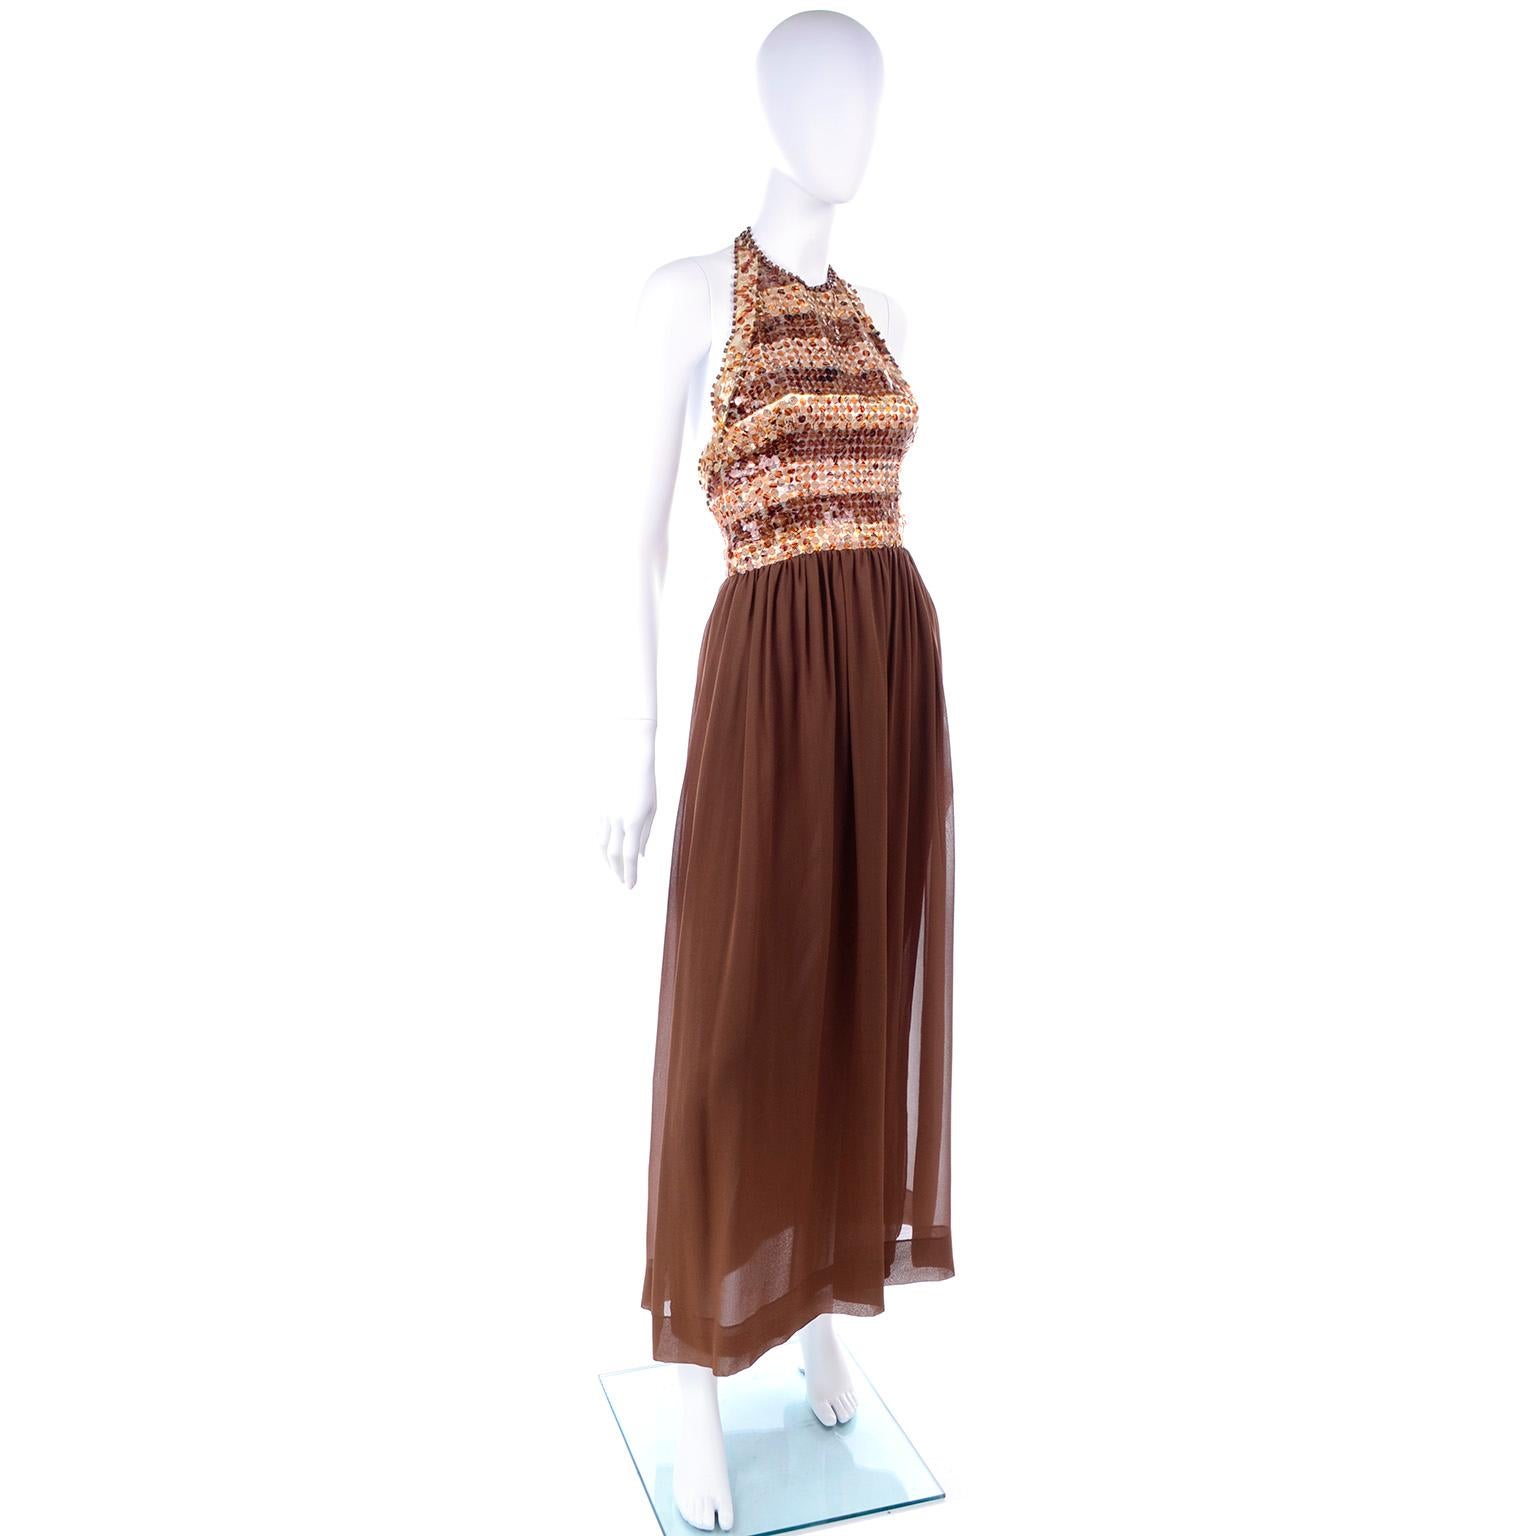 Women's 1996 Givenchy Vintage Chocolate Brown Silk Halter Beaded Evening Dress For Sale